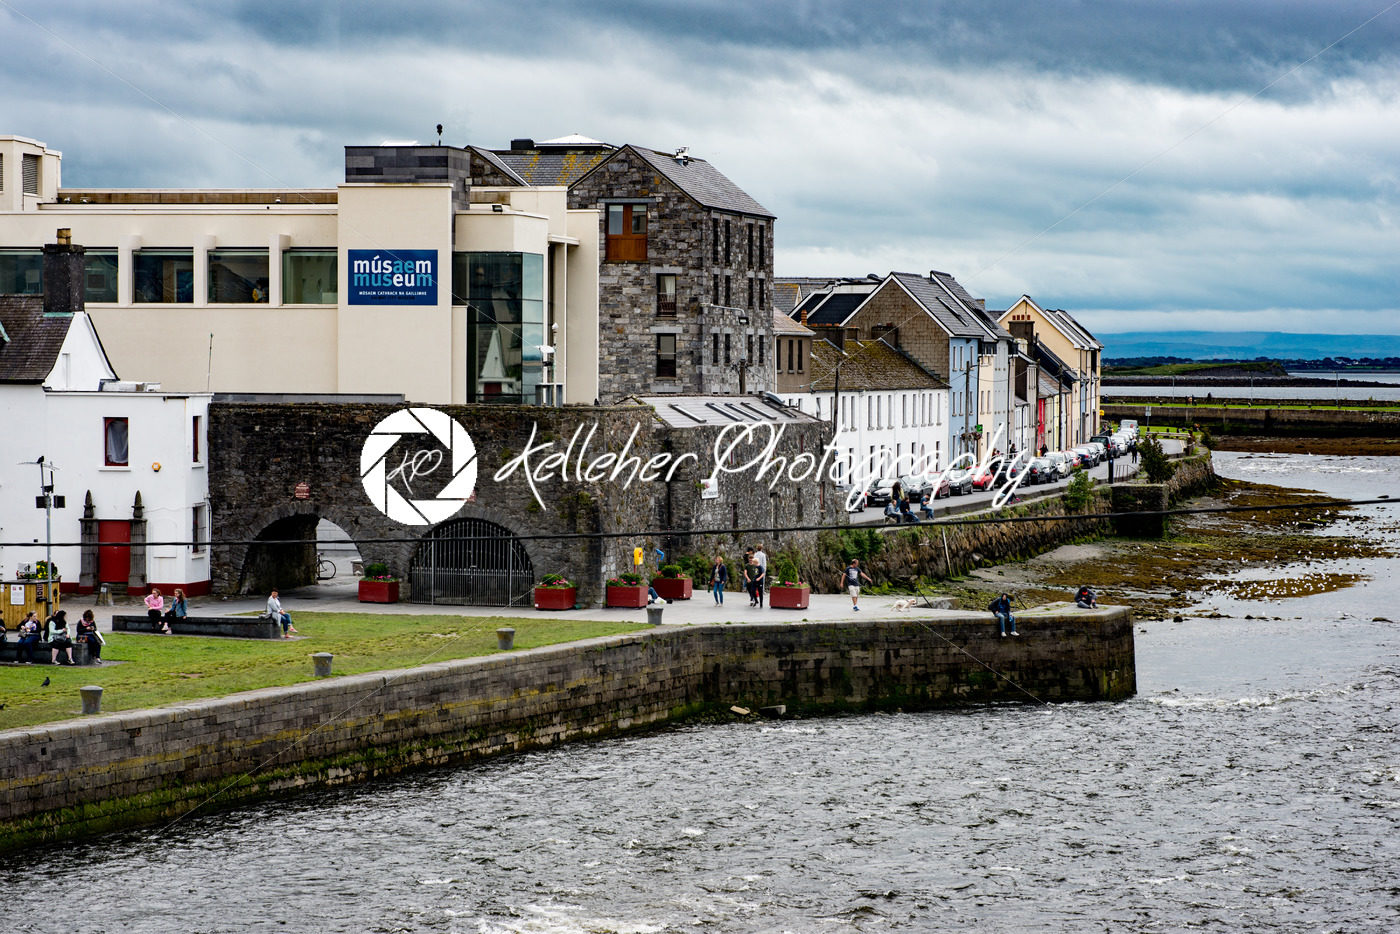 GALWAY, IRELAND – AUGUST 22, 2017: Architecture of city center of Galway Ireland - Kelleher Photography Store